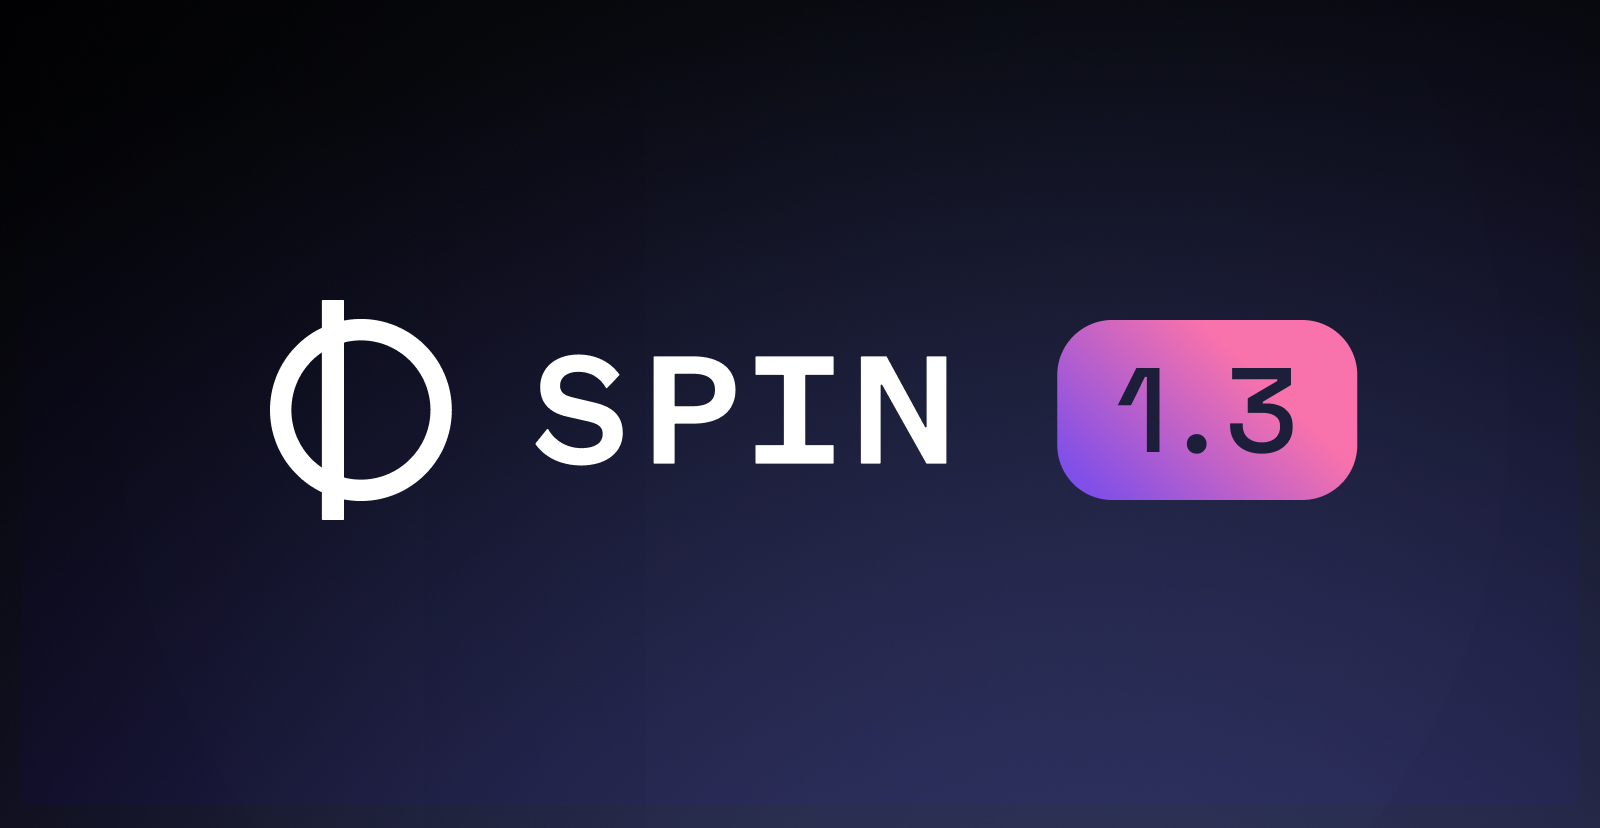 Announcing Spin 1.3